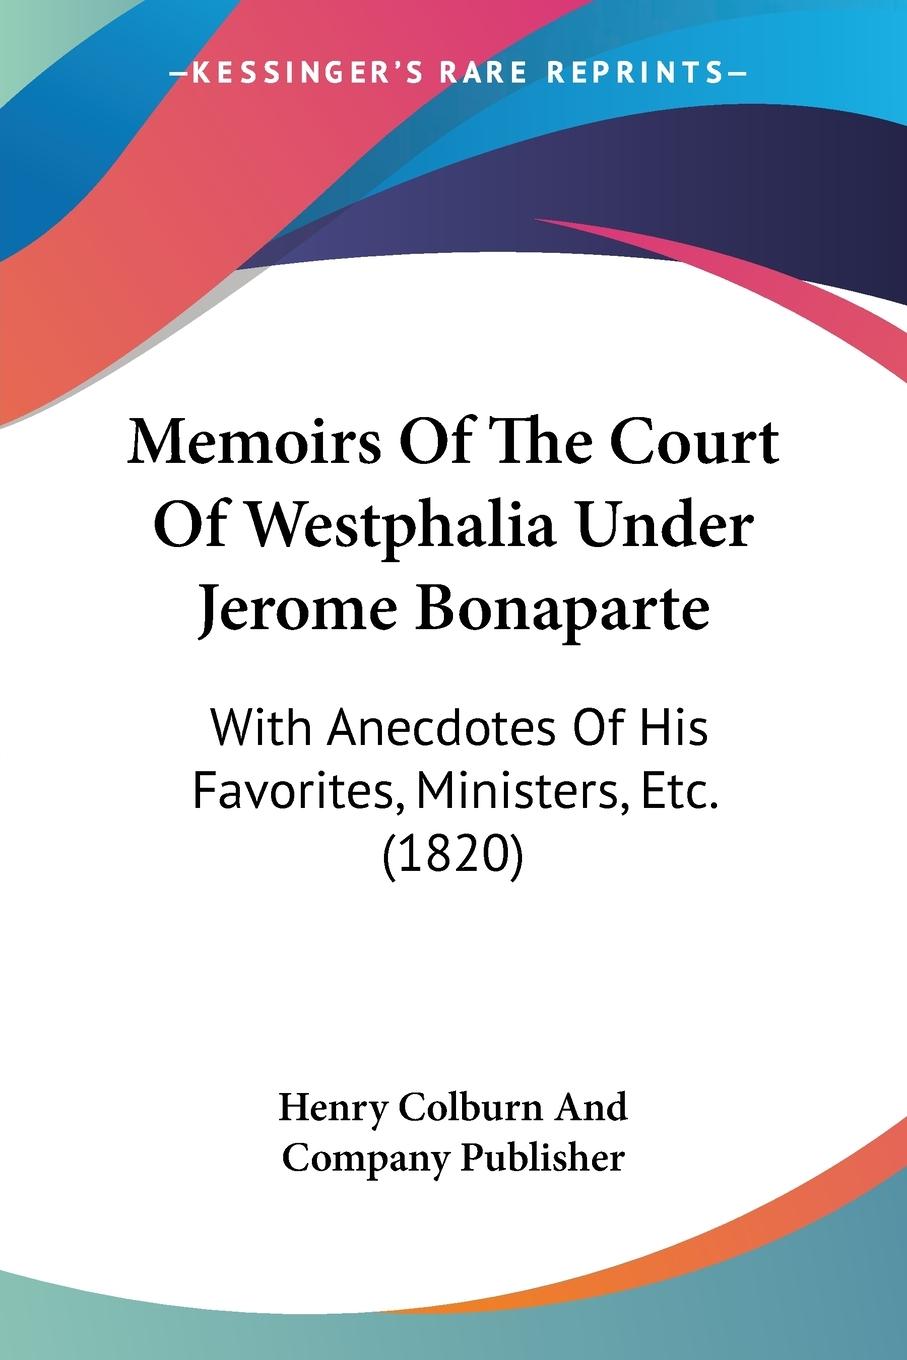 Memoirs Of The Court Of Westphalia Under Jerome Bonaparte - Henry Colburn And Company Publisher